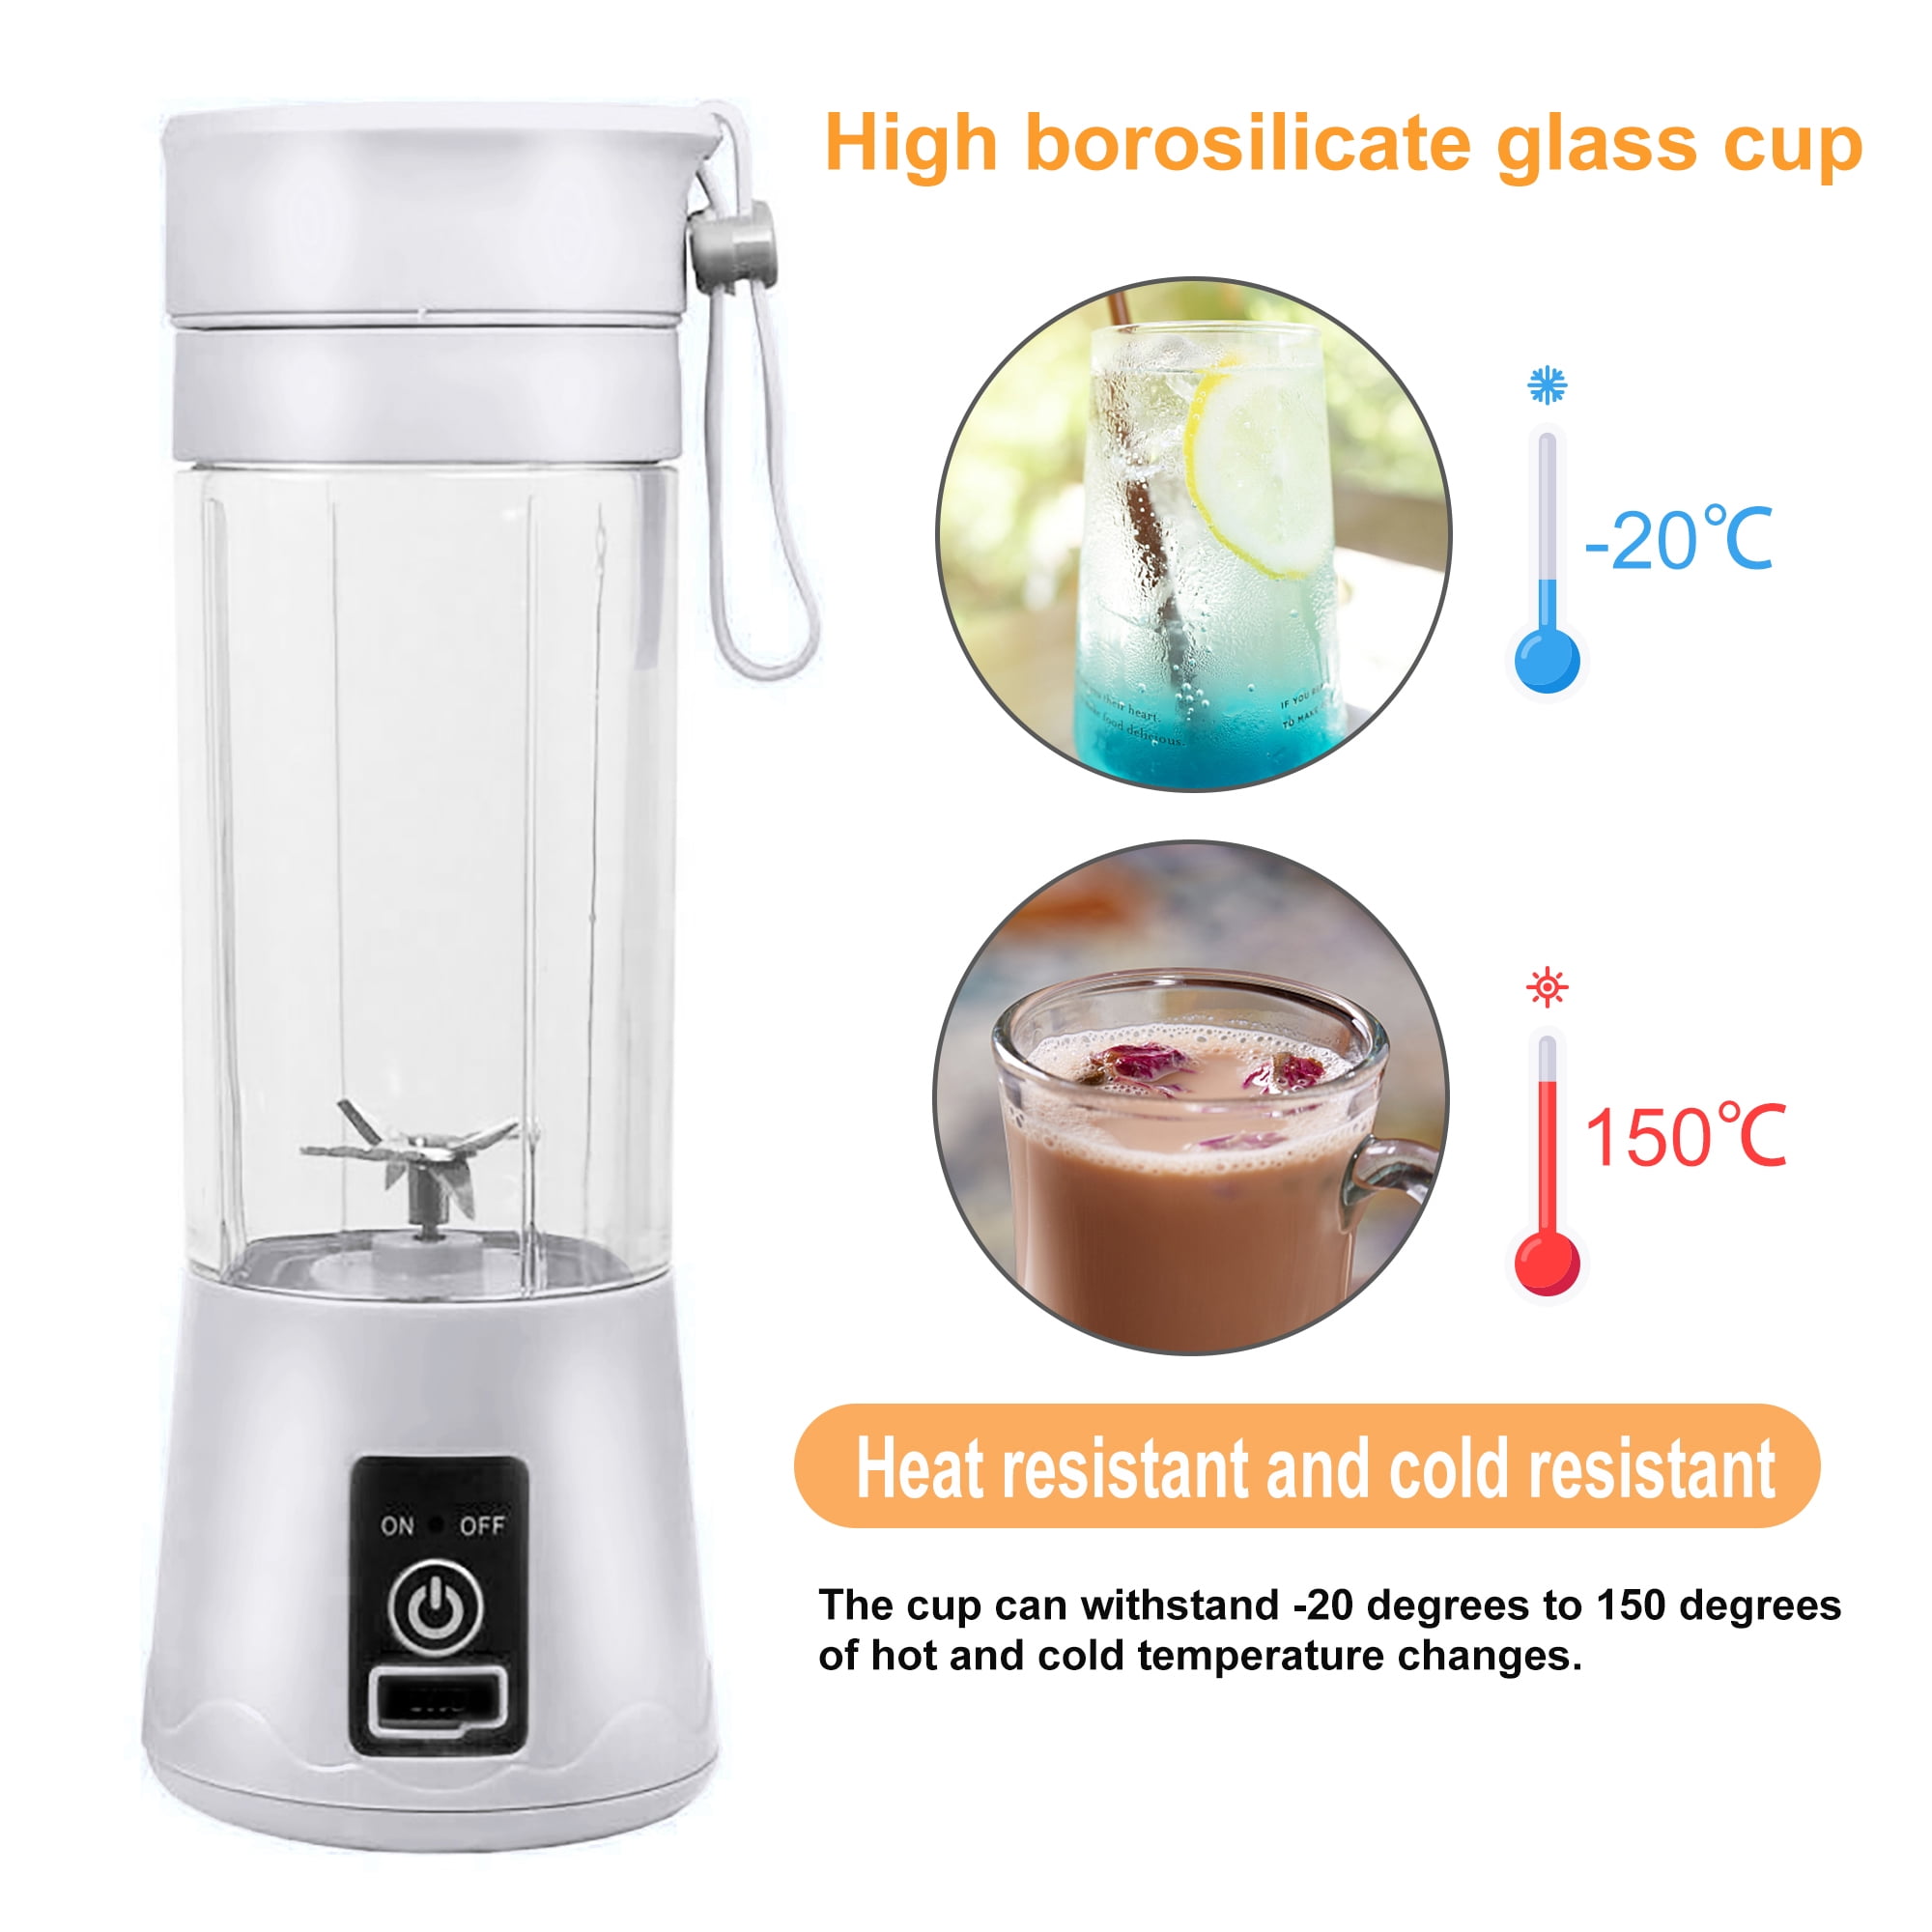 Portable Blender, YKSINX Smoothie Blender, Personal Mini Blender Shakes and Smoothies 13oz 2000mAh Rechargeable Home Travel Fruit Juicer Cup (Black)